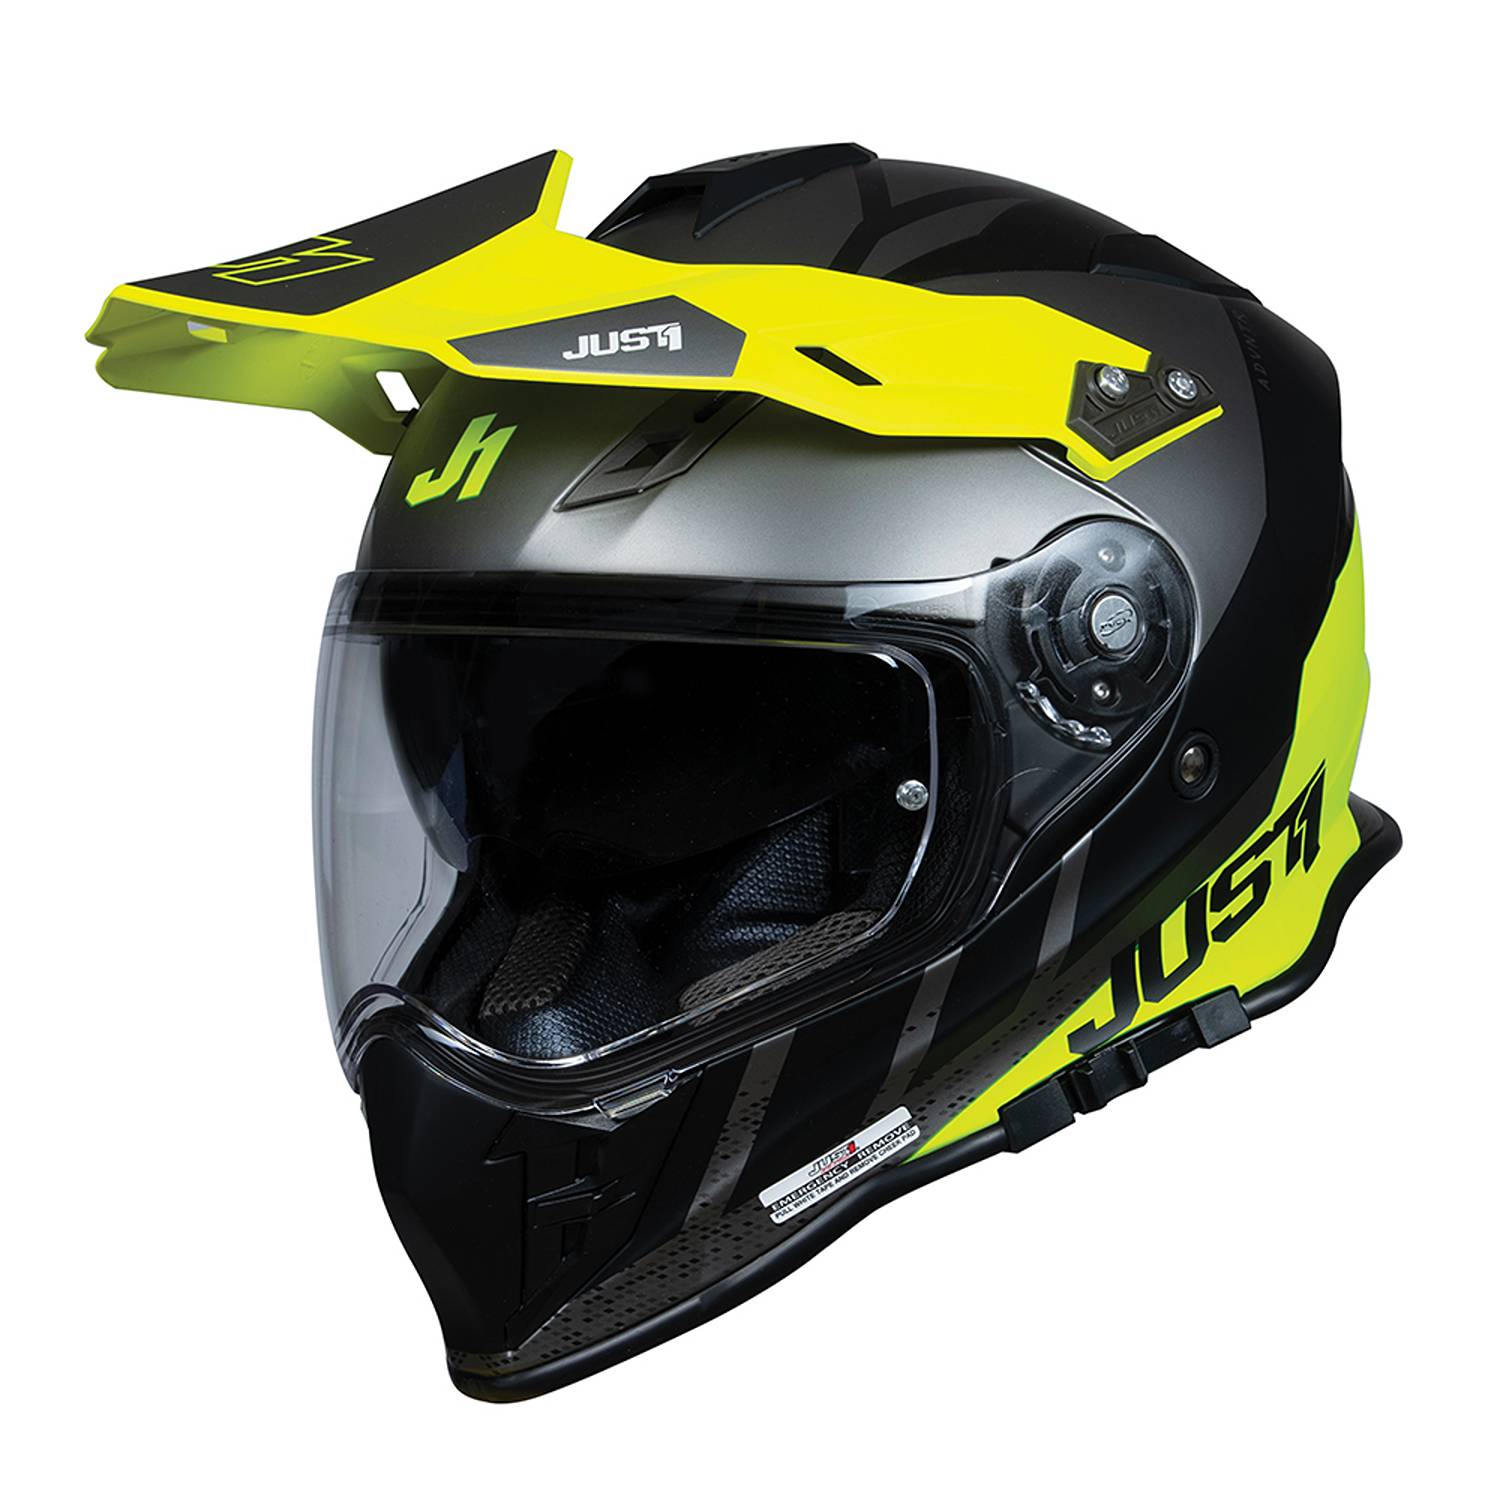 Image of EU Just1 J34 Pro Outerspace Jaune Vert Titane Aventure Casques Taille XL